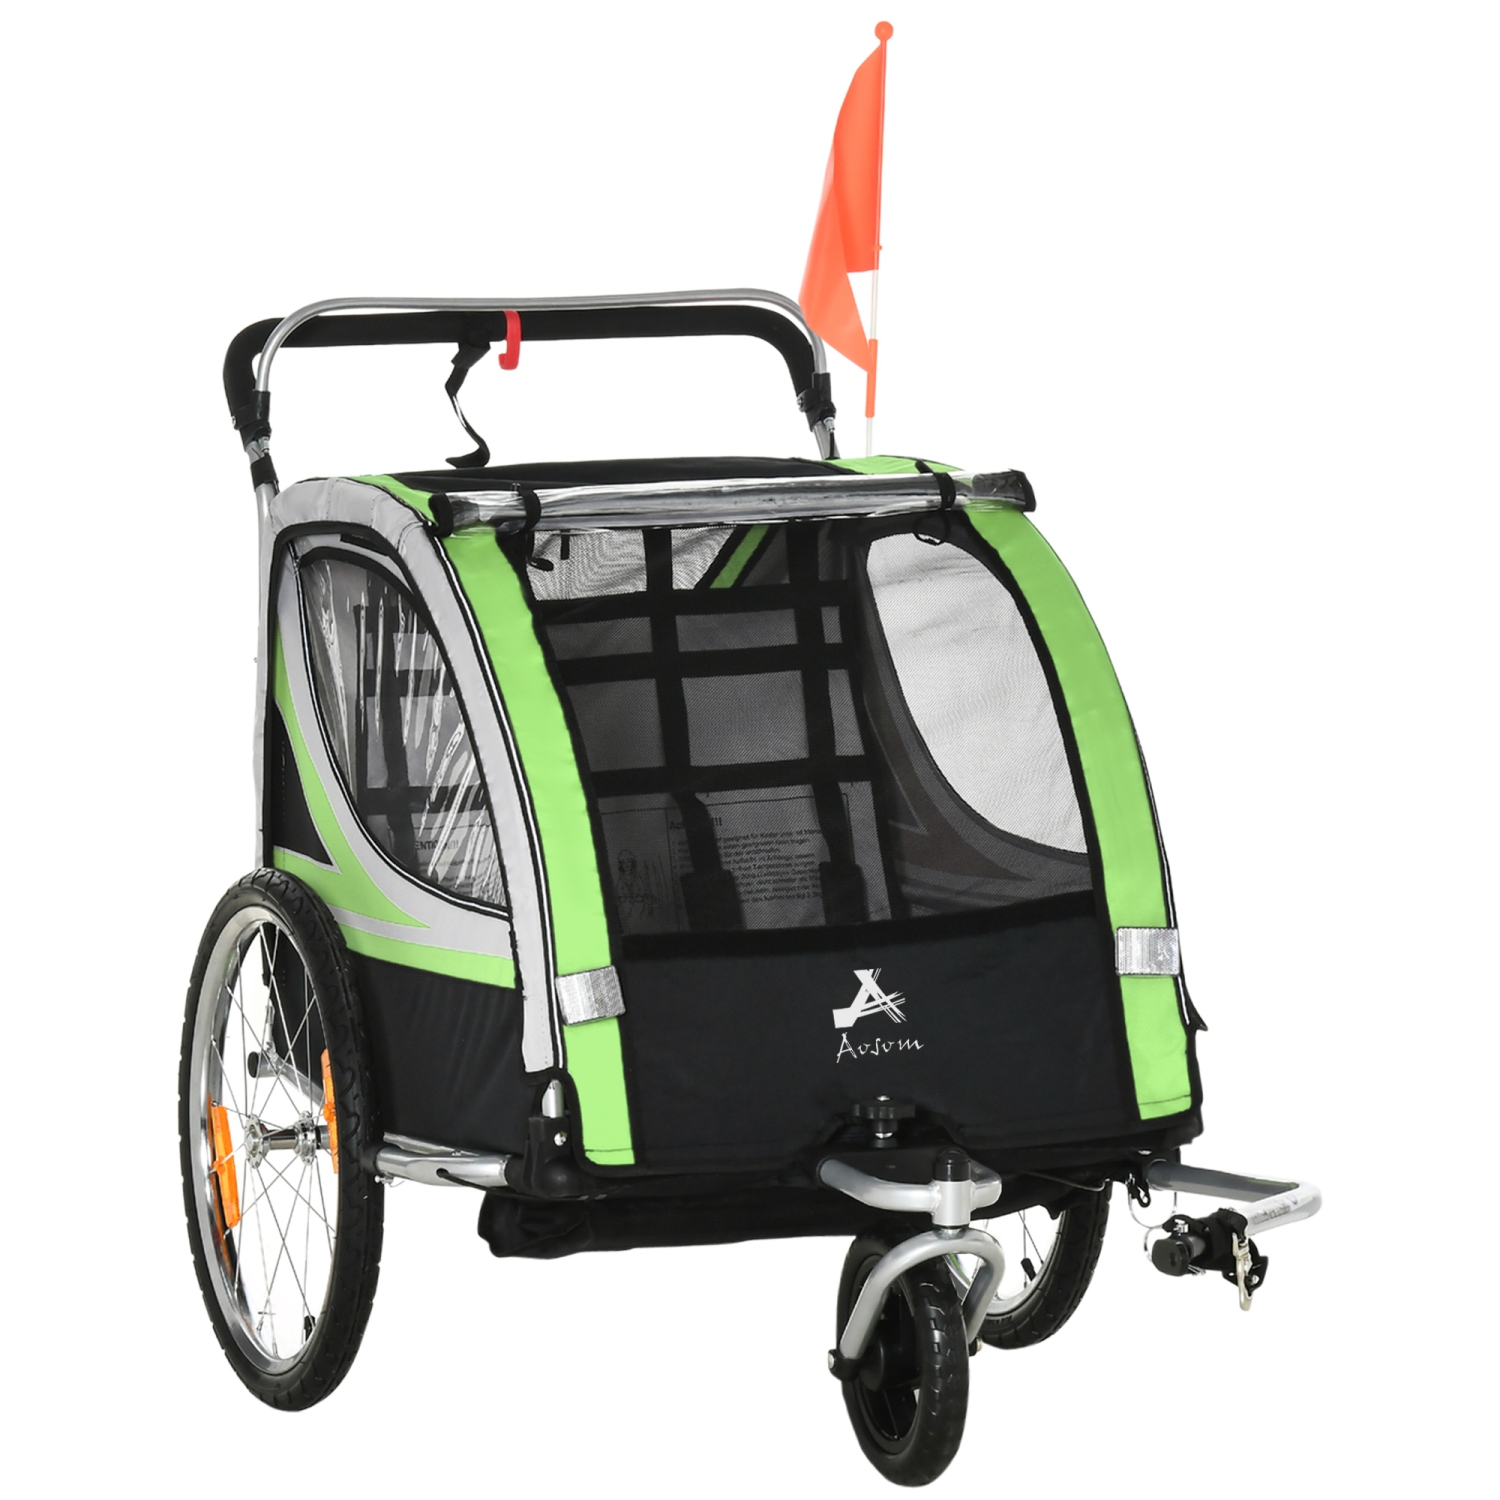 Aosom 2-in-1 Bike Trailer for Kids 2 Seater, Baby Stroller with Brake, Storage Bag, Safety Flag, Reflectors & 5 Point Harness, Green